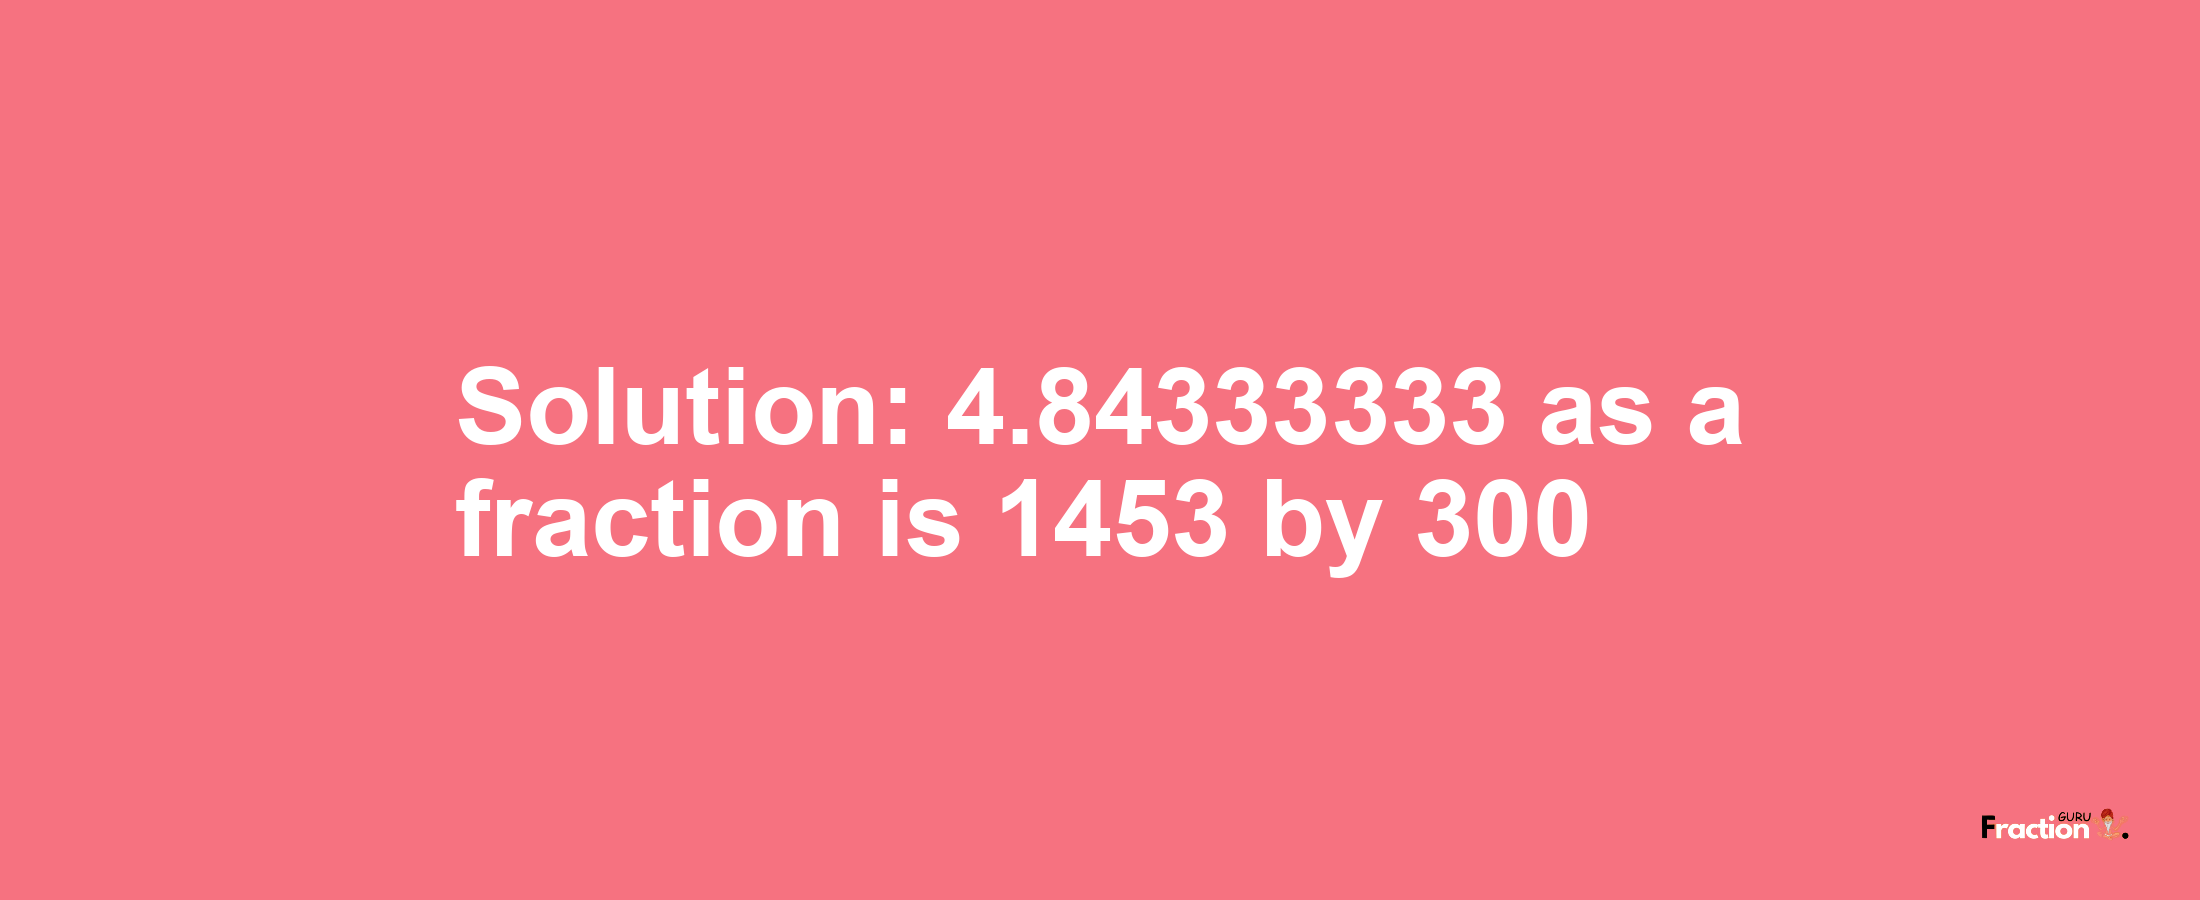 Solution:4.84333333 as a fraction is 1453/300